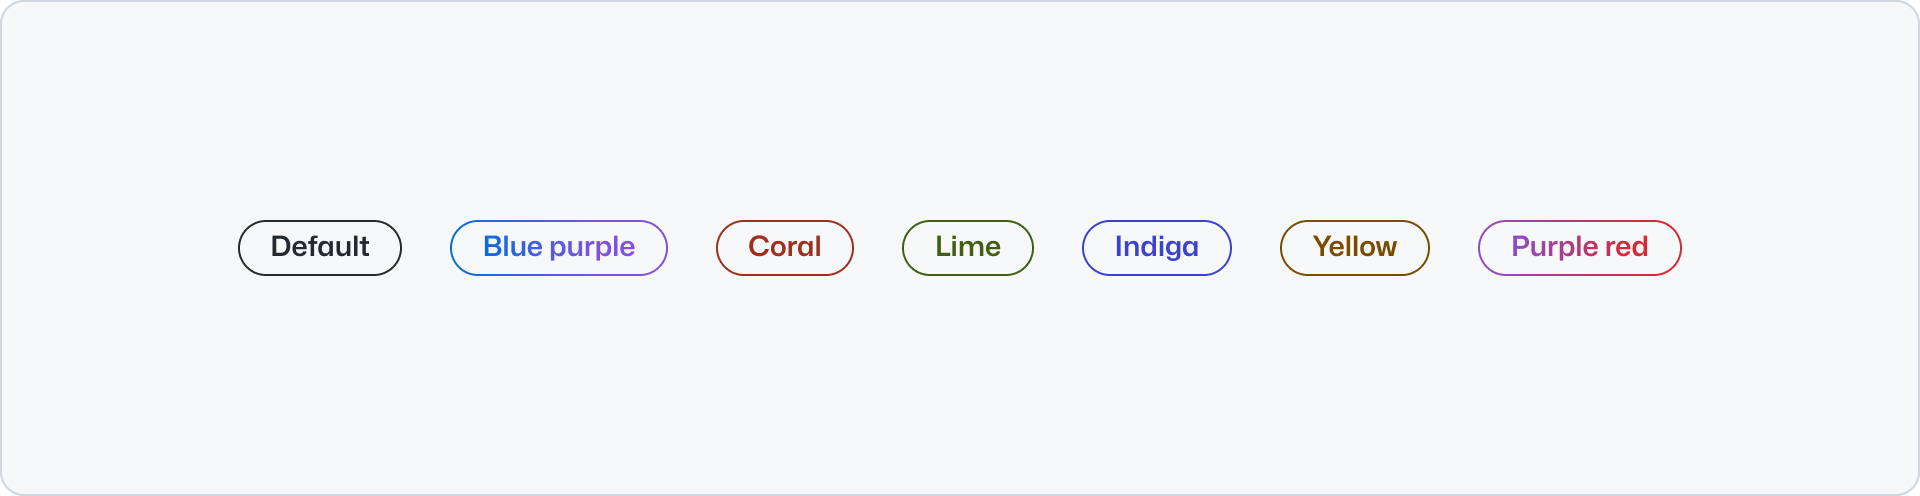 An image showing multiple label options with different colors.